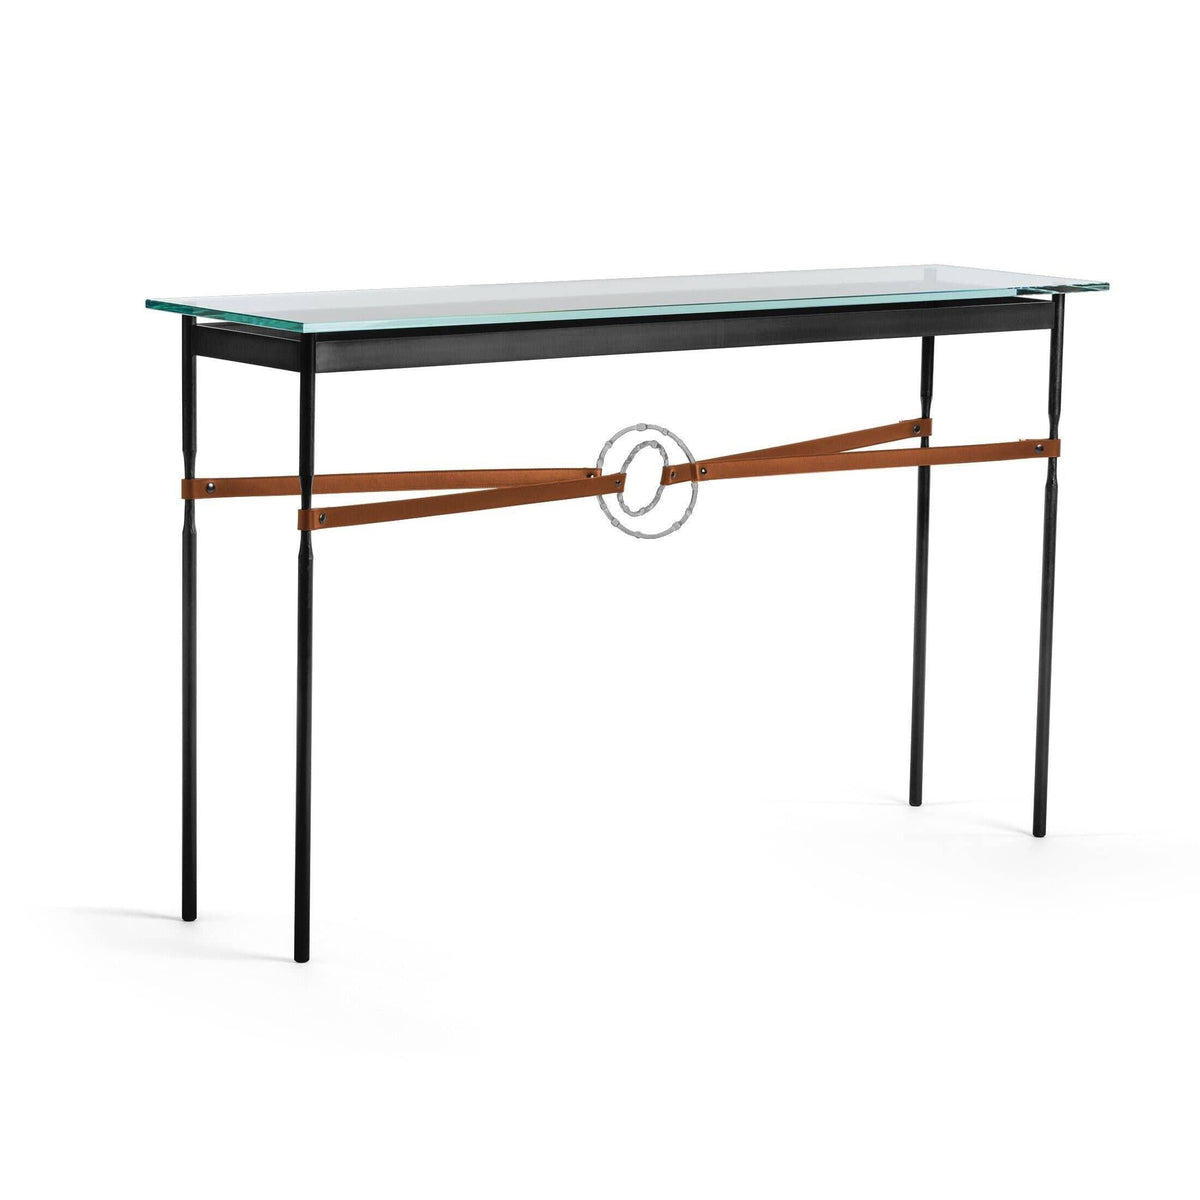 Hubbardton Forge - Equus Chestnut Leather Console Table - 750118-10-82-LC-VA0714 | Montreal Lighting & Hardware